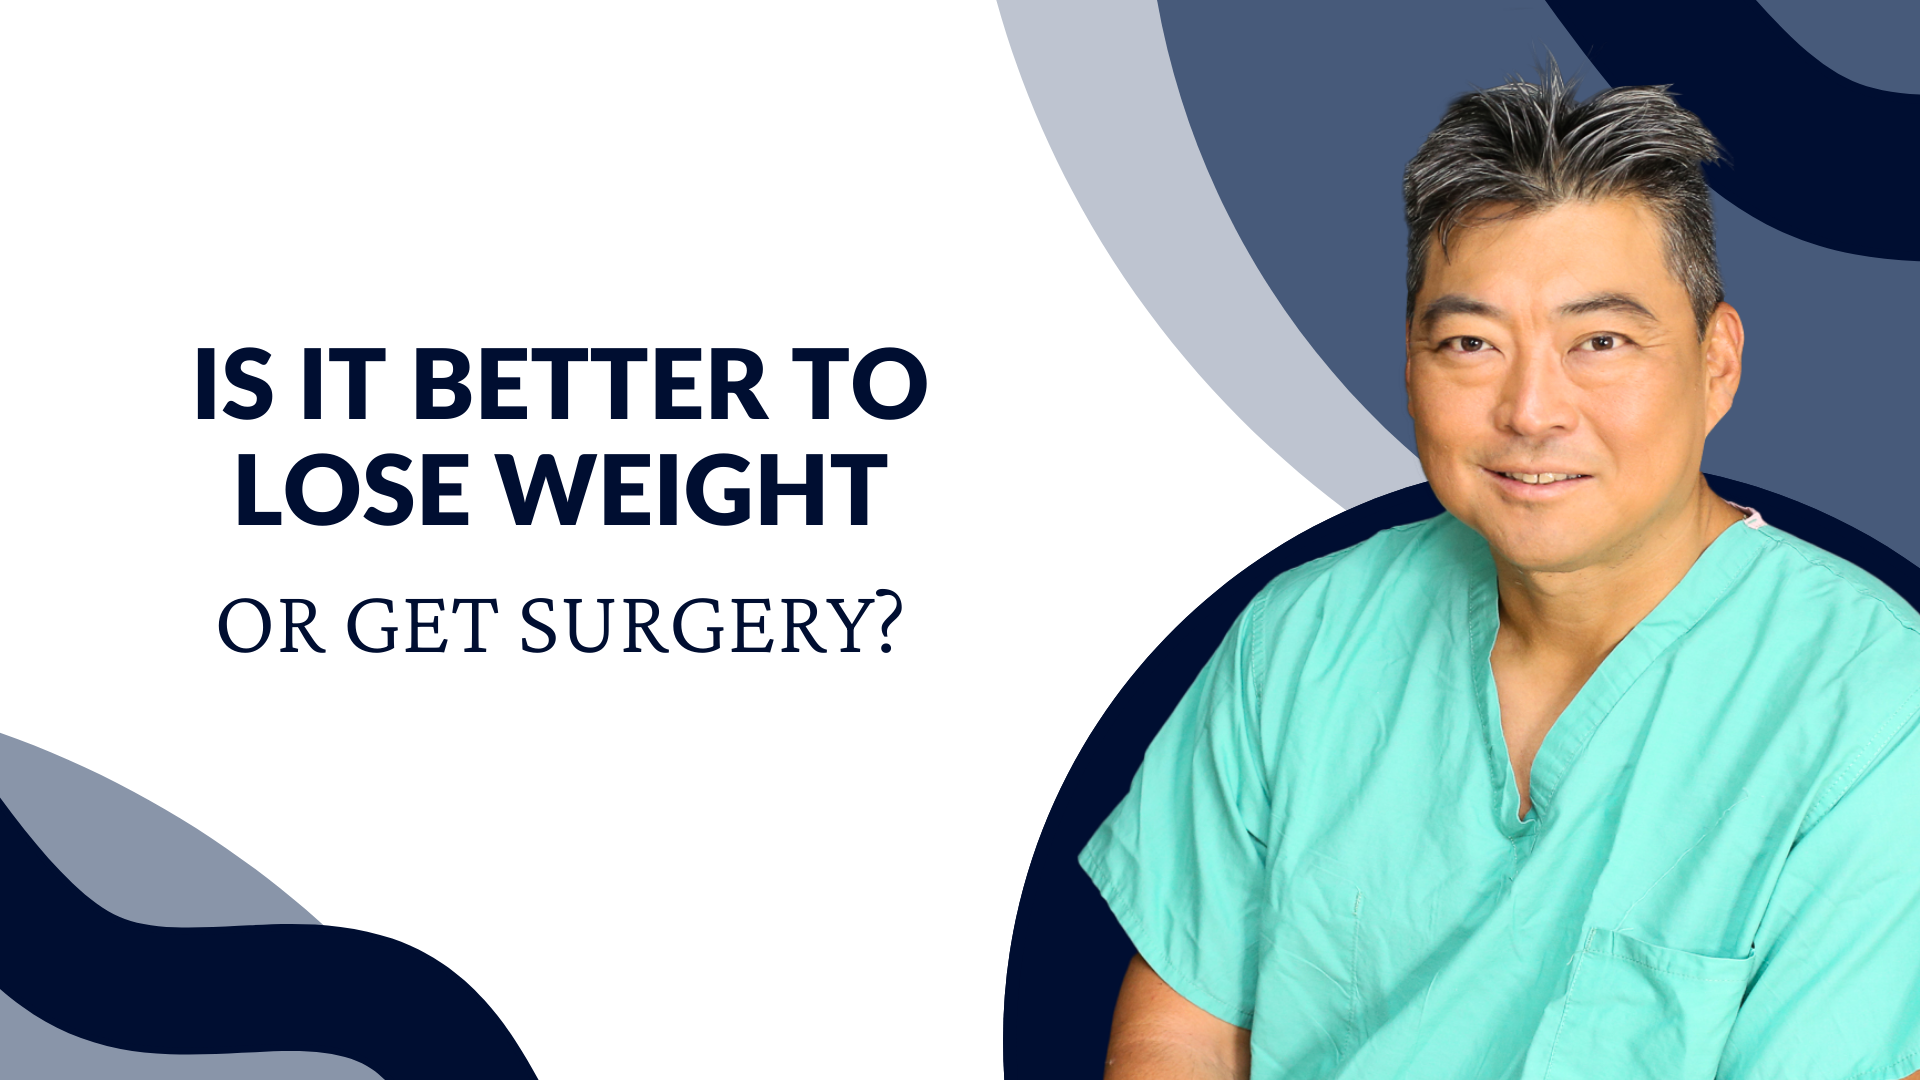 Is It Better to Lose Weight or Get Surgery